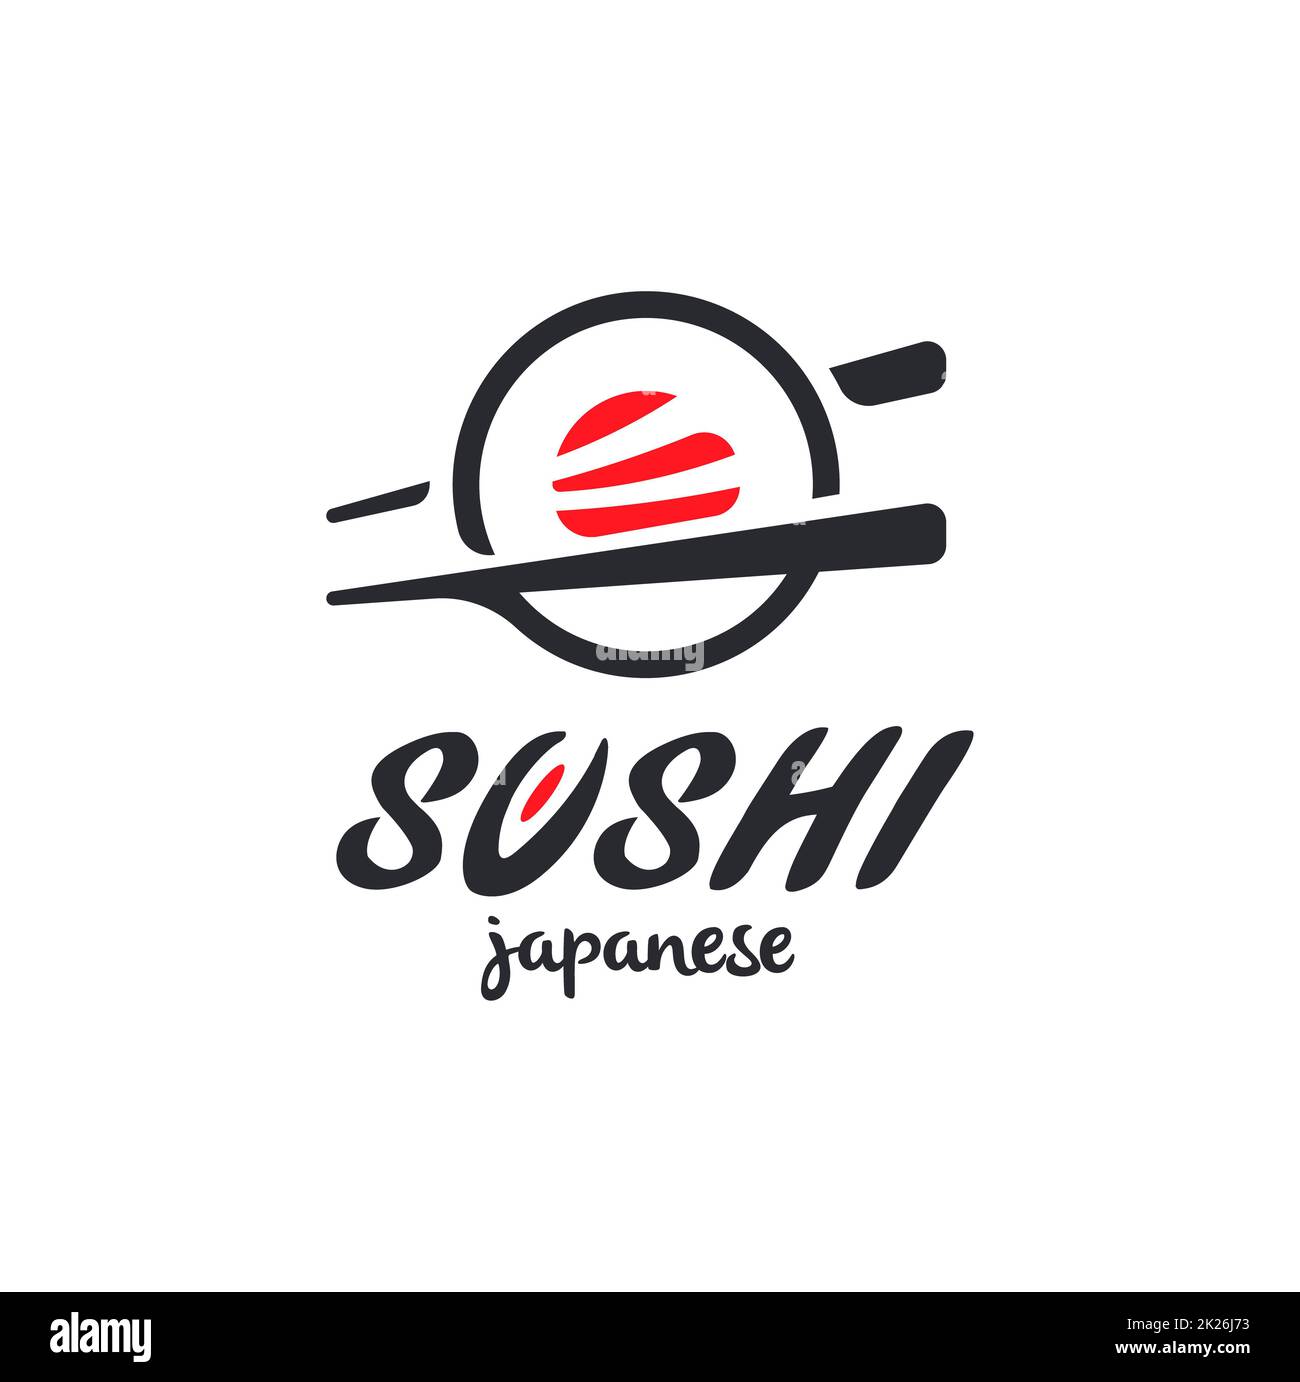 Sushi and rolls with chopstick bar or restaurant vector logo template. Japanese or chinese traditional cuisine, tasty food icon. Abstract black and red color for asian emblem. Stock Photo